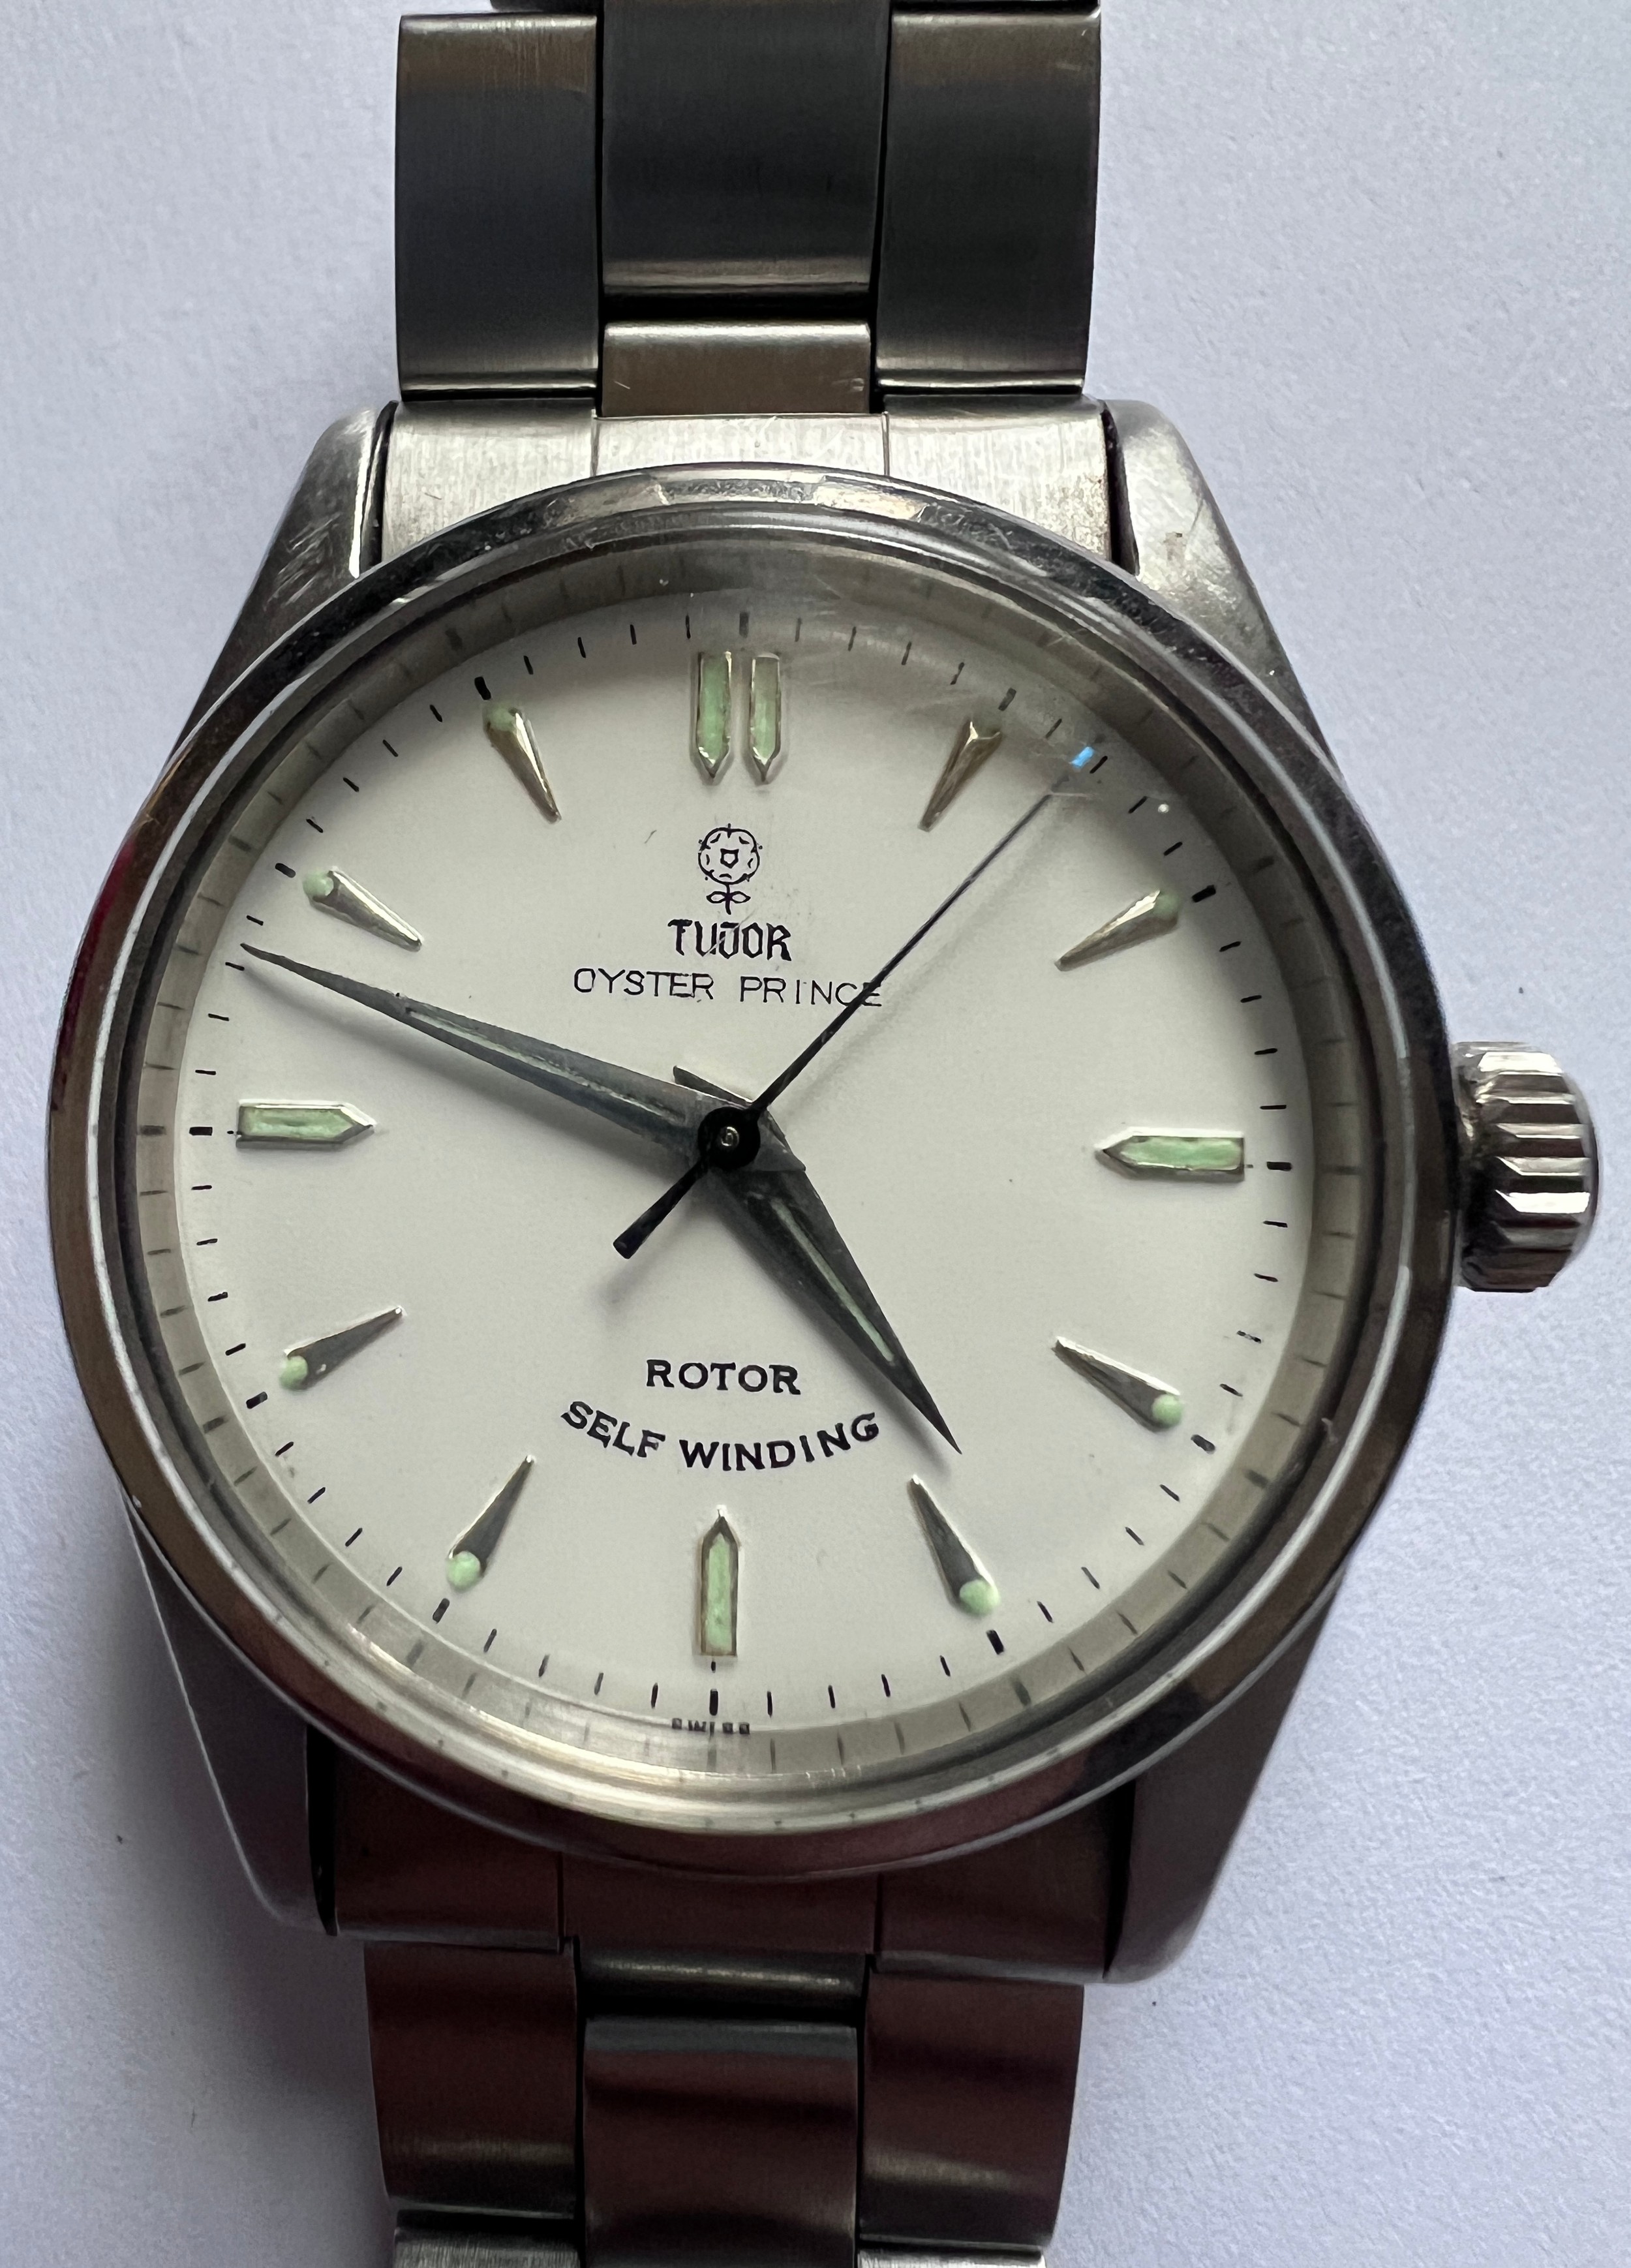 A Tudor Oyster Prince Rotor self winding wristwatch. Rolex crown with stainless steel Tudor strap.